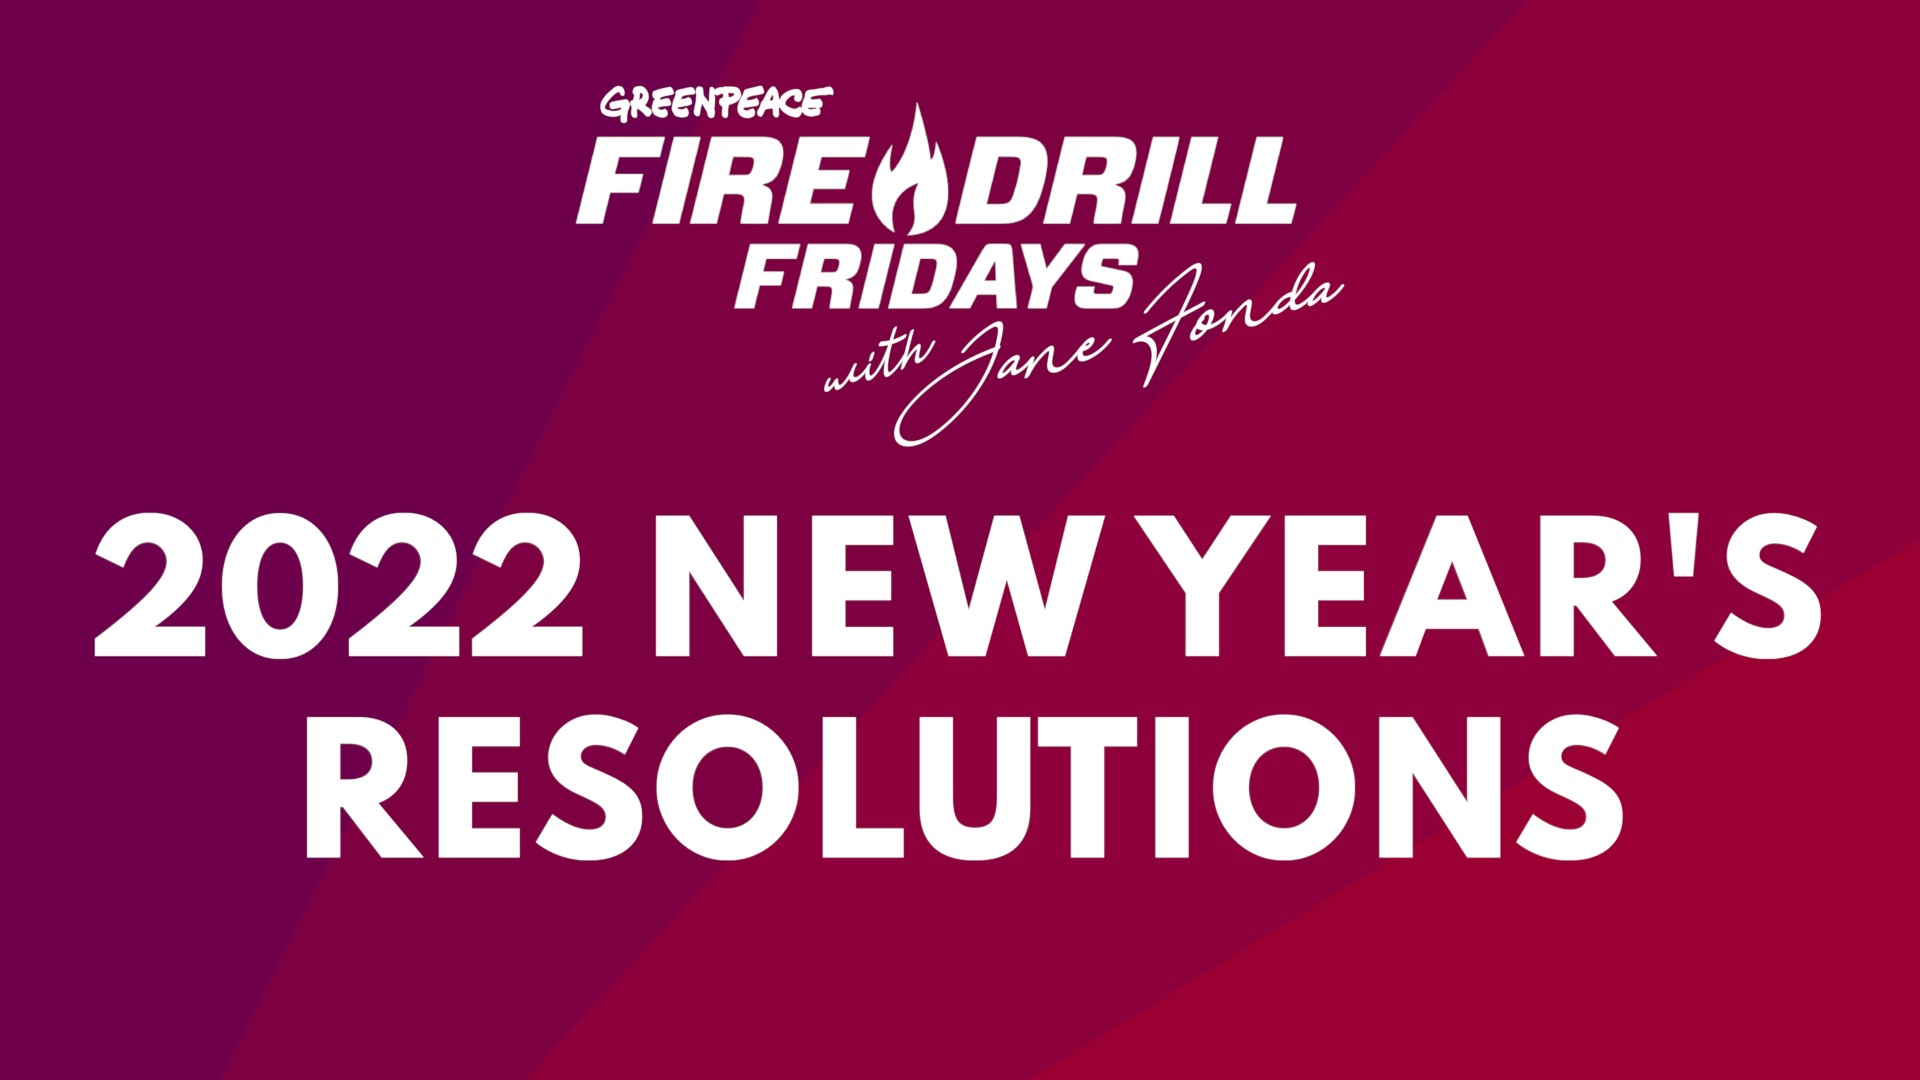 Watch Our 2022 New Year’s Resolutions